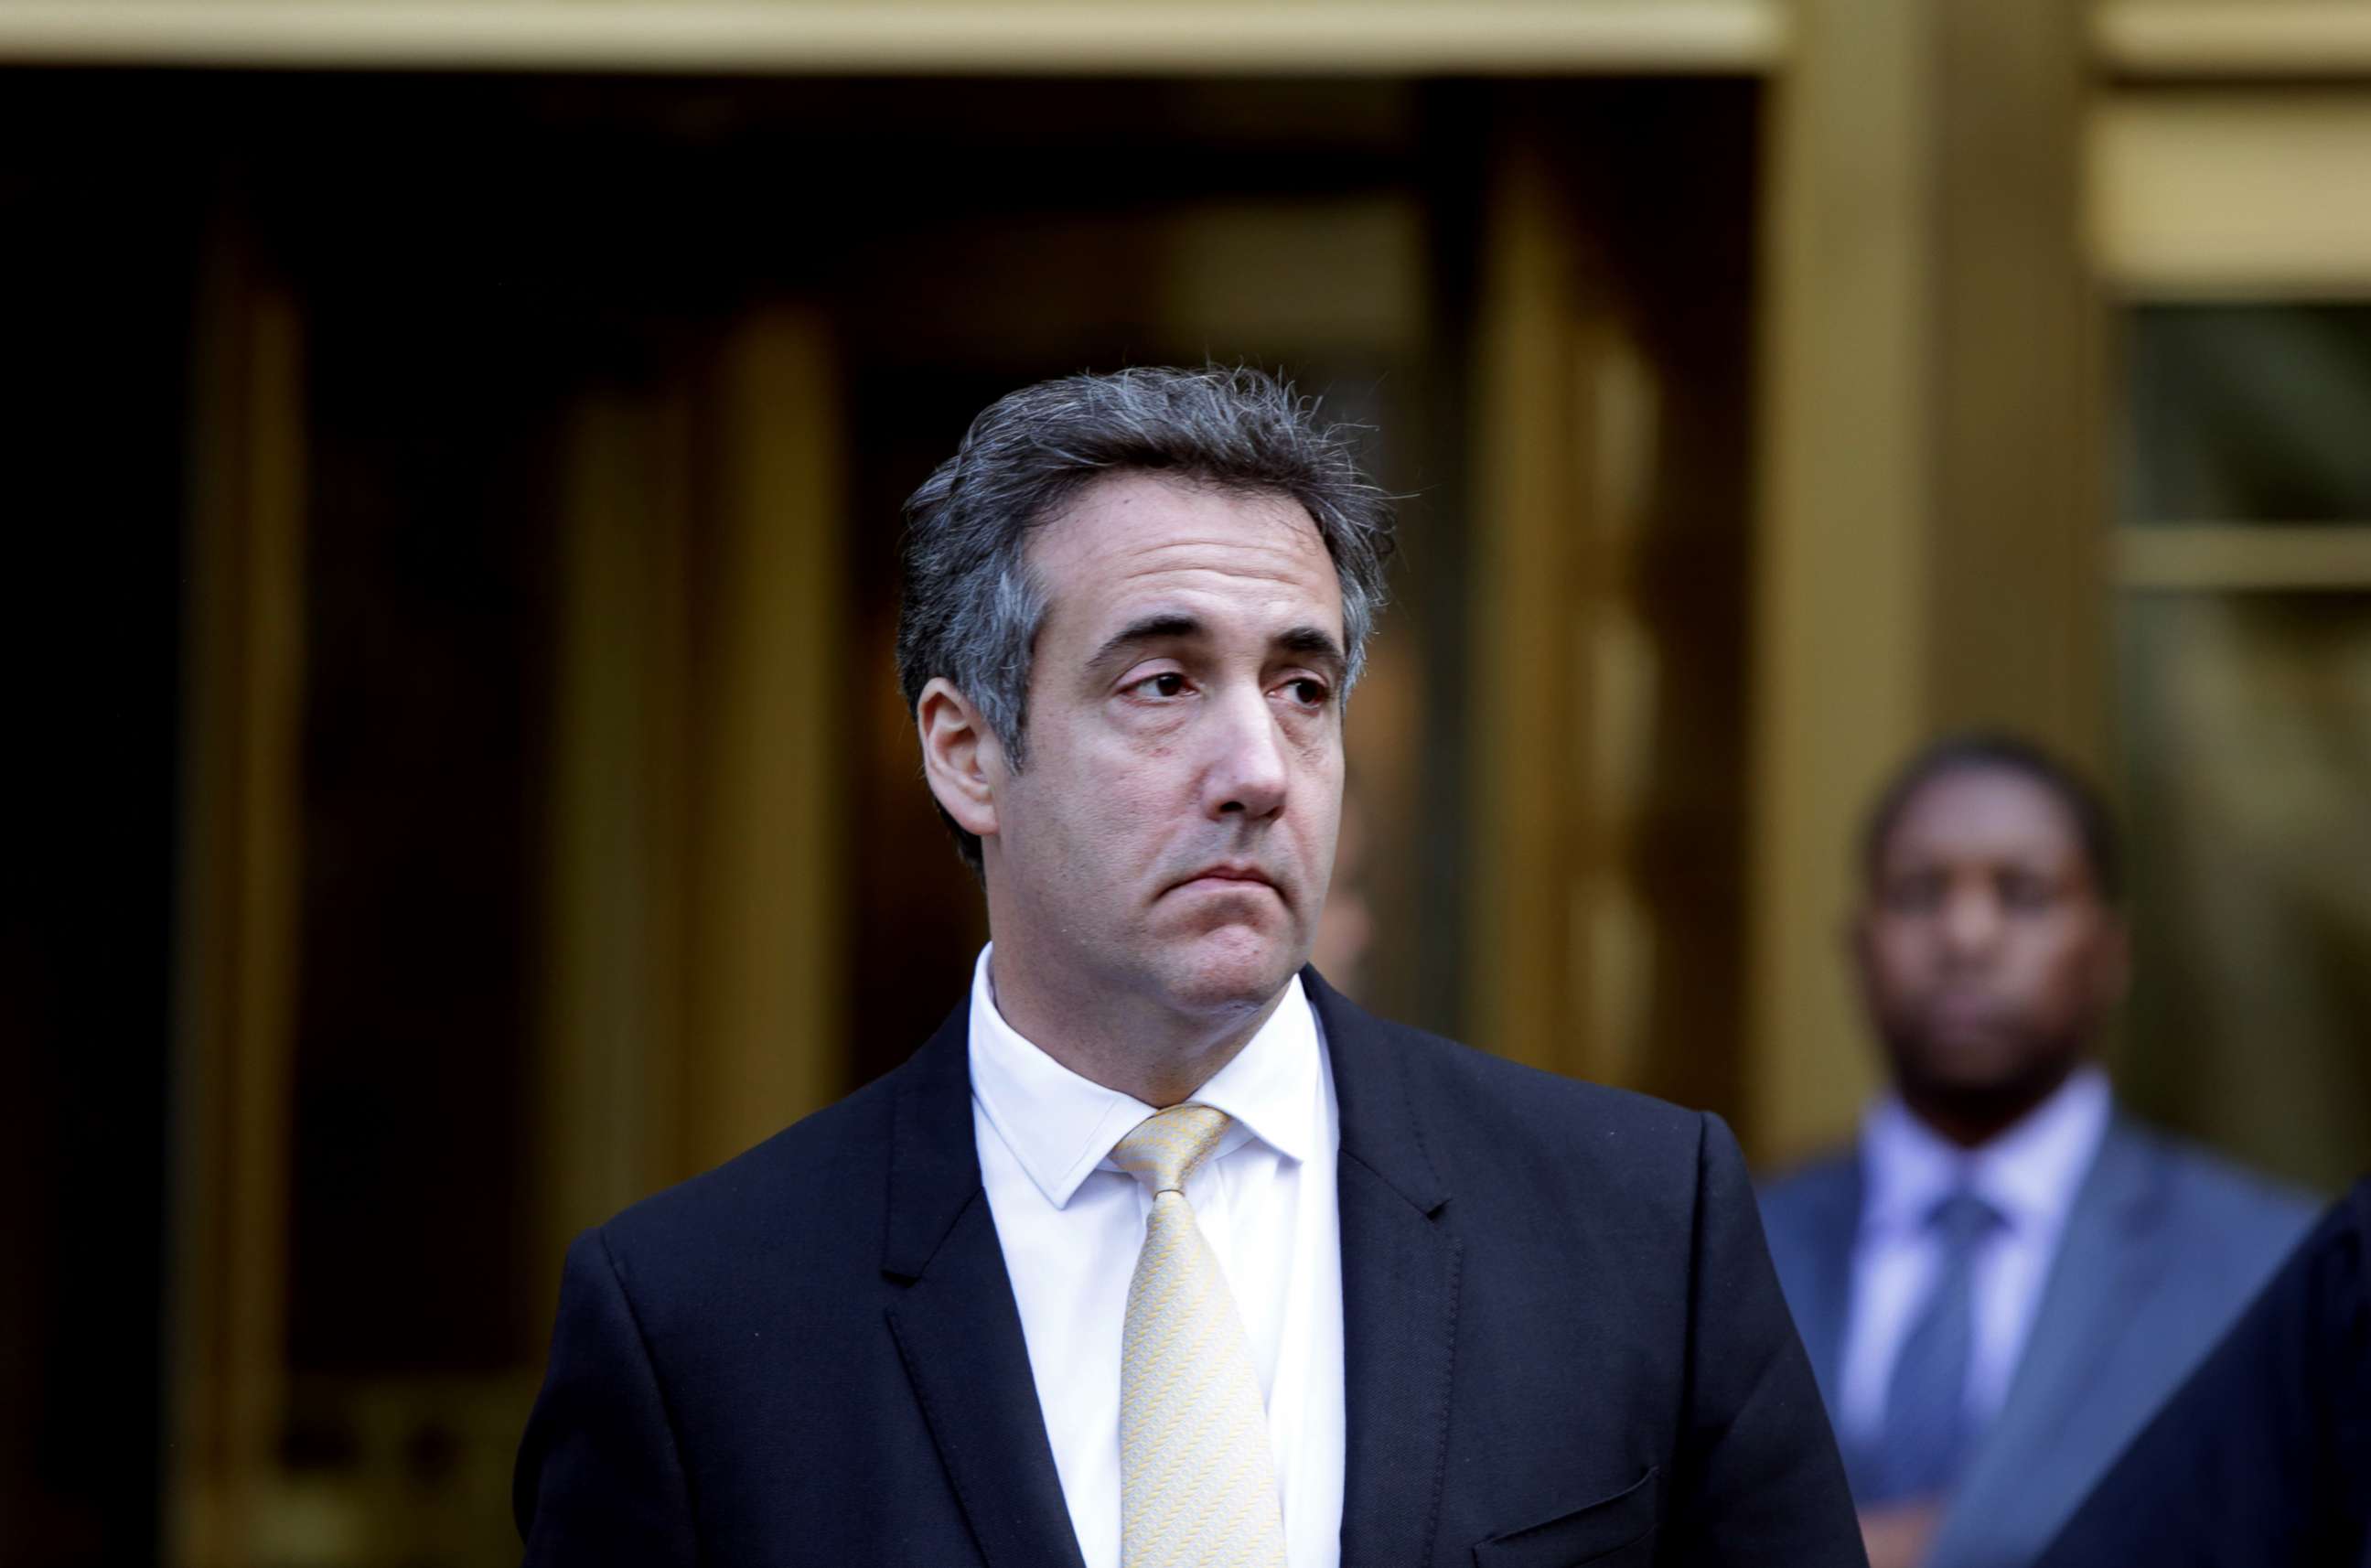 PHOTO: Michael Cohen, former lawyer to President Donald Trump, exits the Federal Courthouse on Aug. 21, 2018 in New York City.